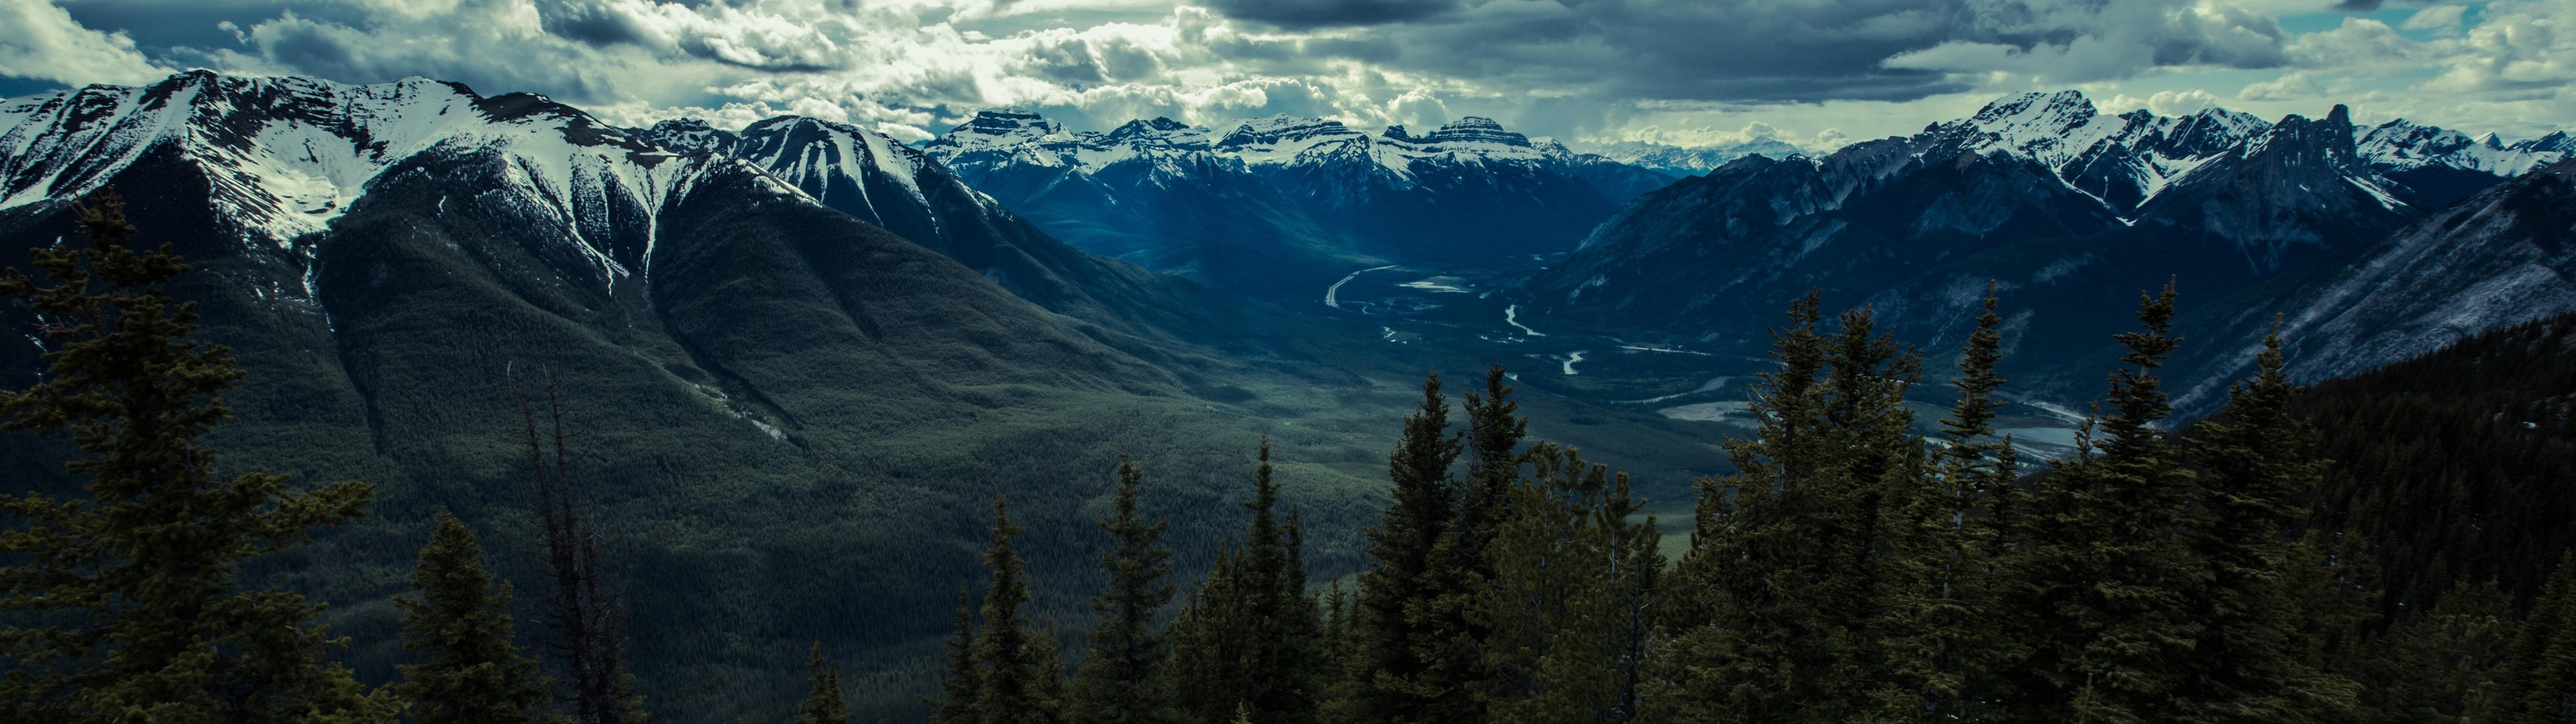 General 3840x1080 landscape forest mountains panorama Banff Banff National Park Canada